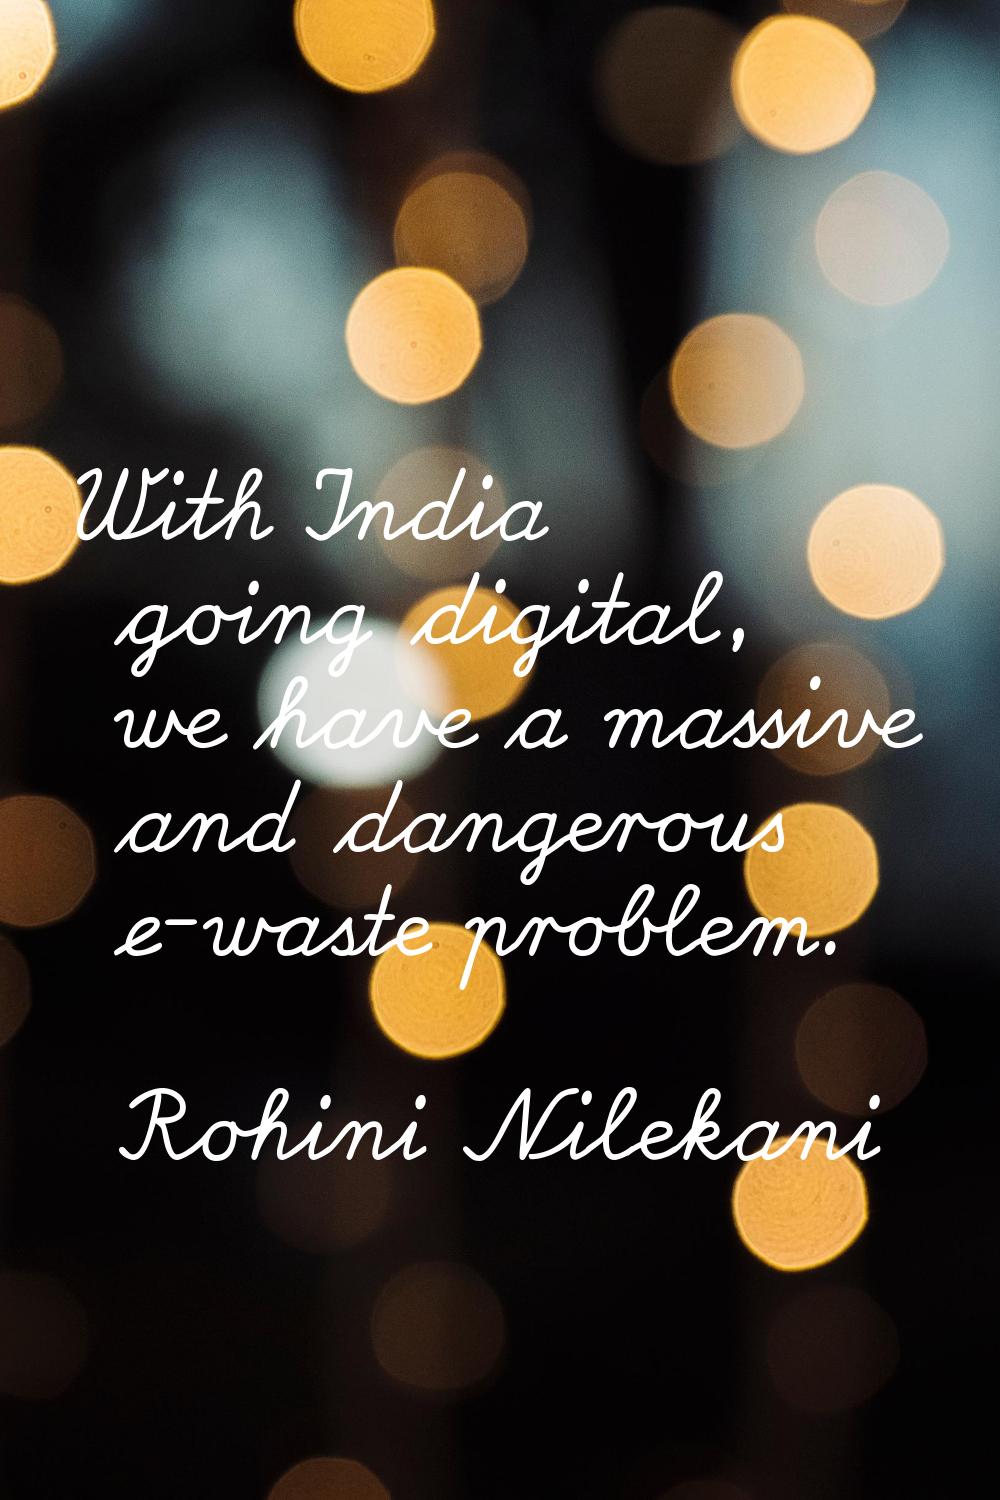 With India going digital, we have a massive and dangerous e-waste problem.